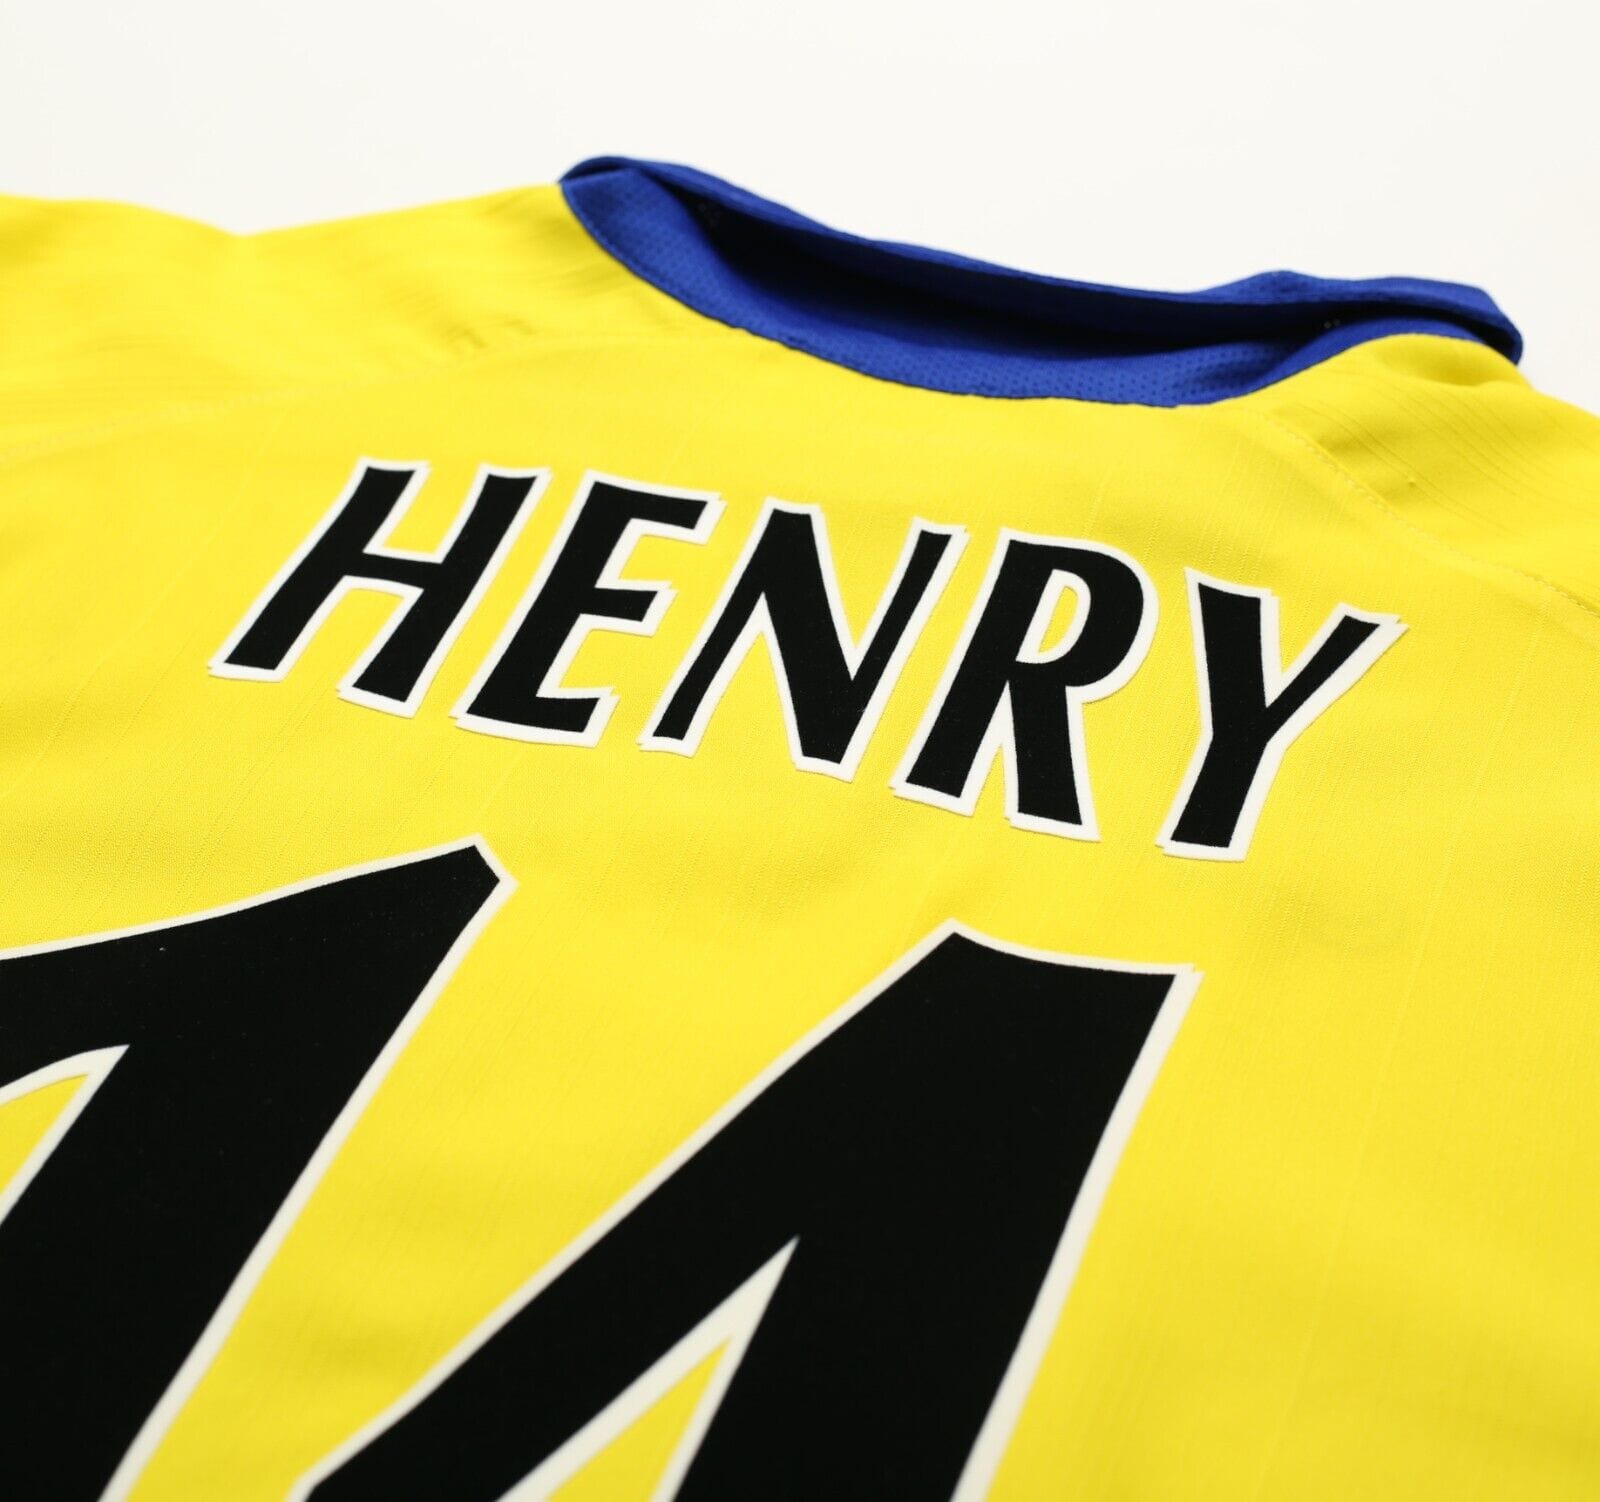 2003-04 Arsenal Home Henry #14